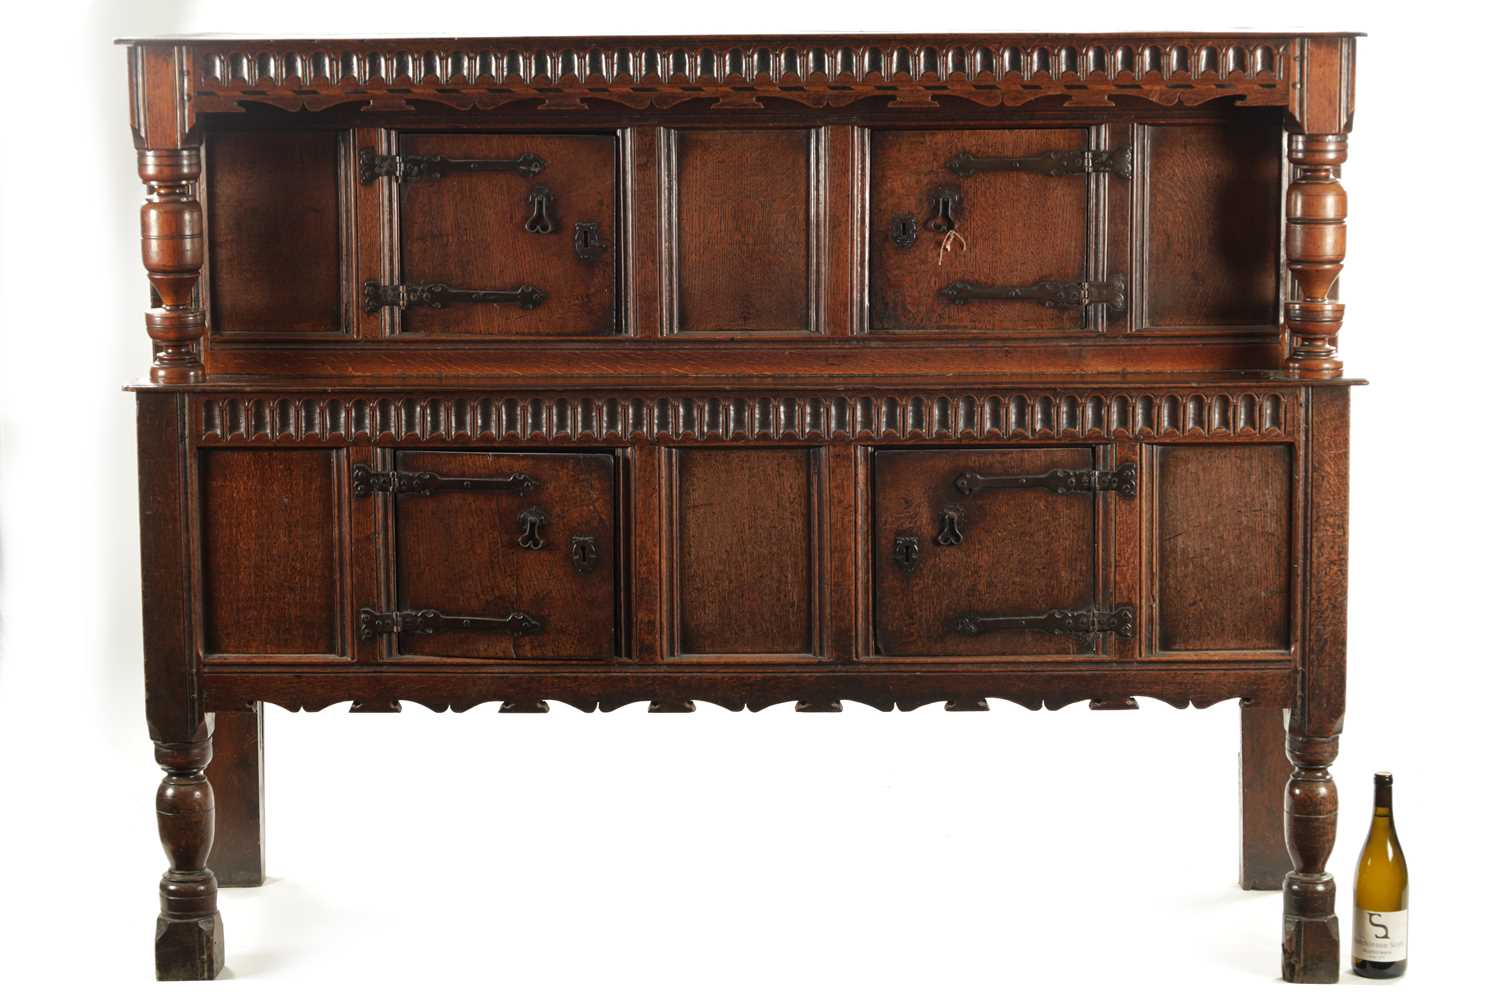 A RARE 17TH CENTURY JOINED OAK CARVED COURT CUPBOARD/BUFFET - Image 4 of 6